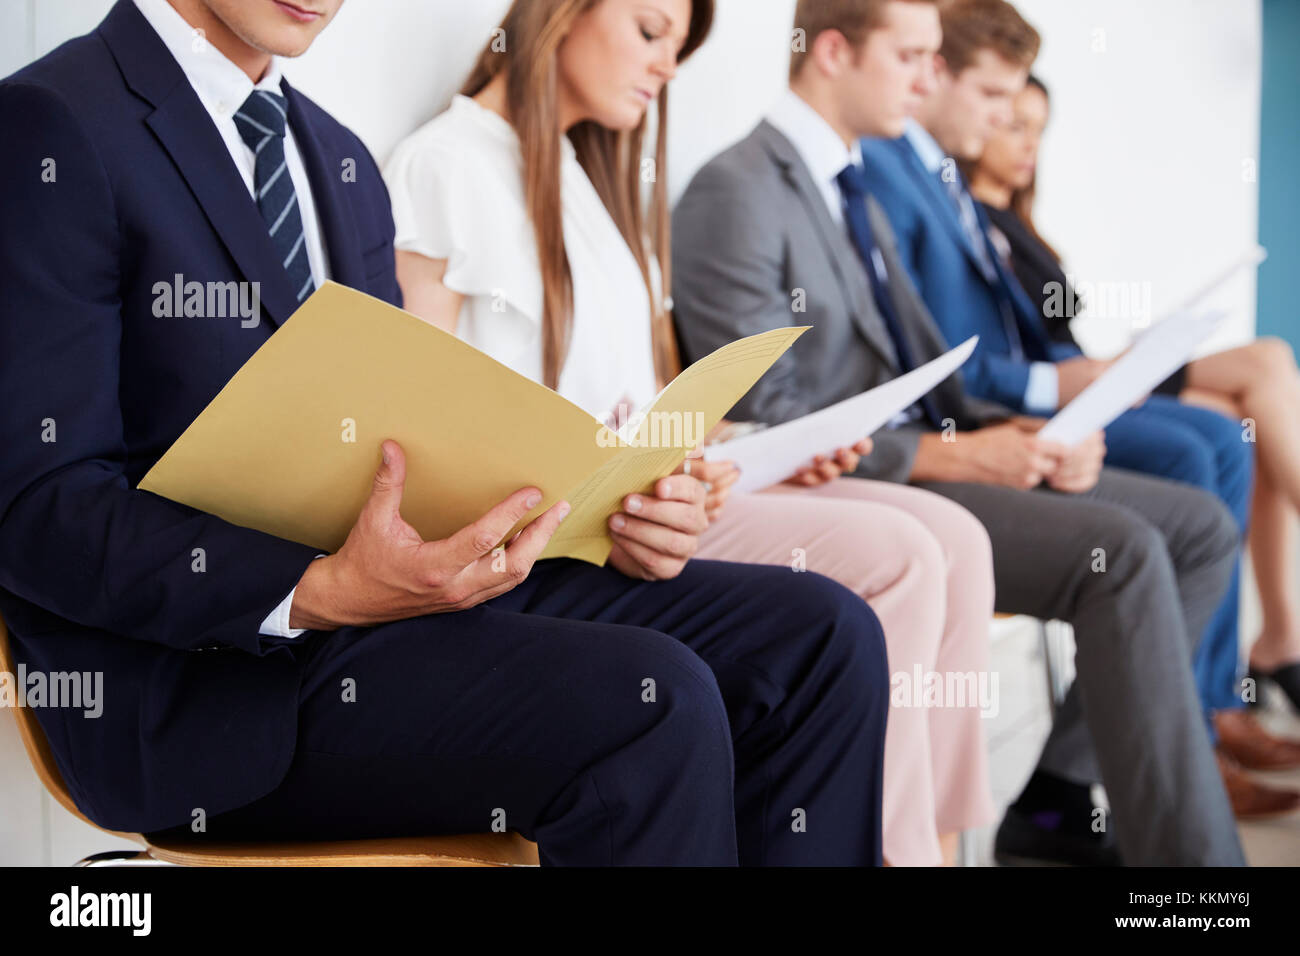 Candidates waiting for job interviews, mid section Stock Photo